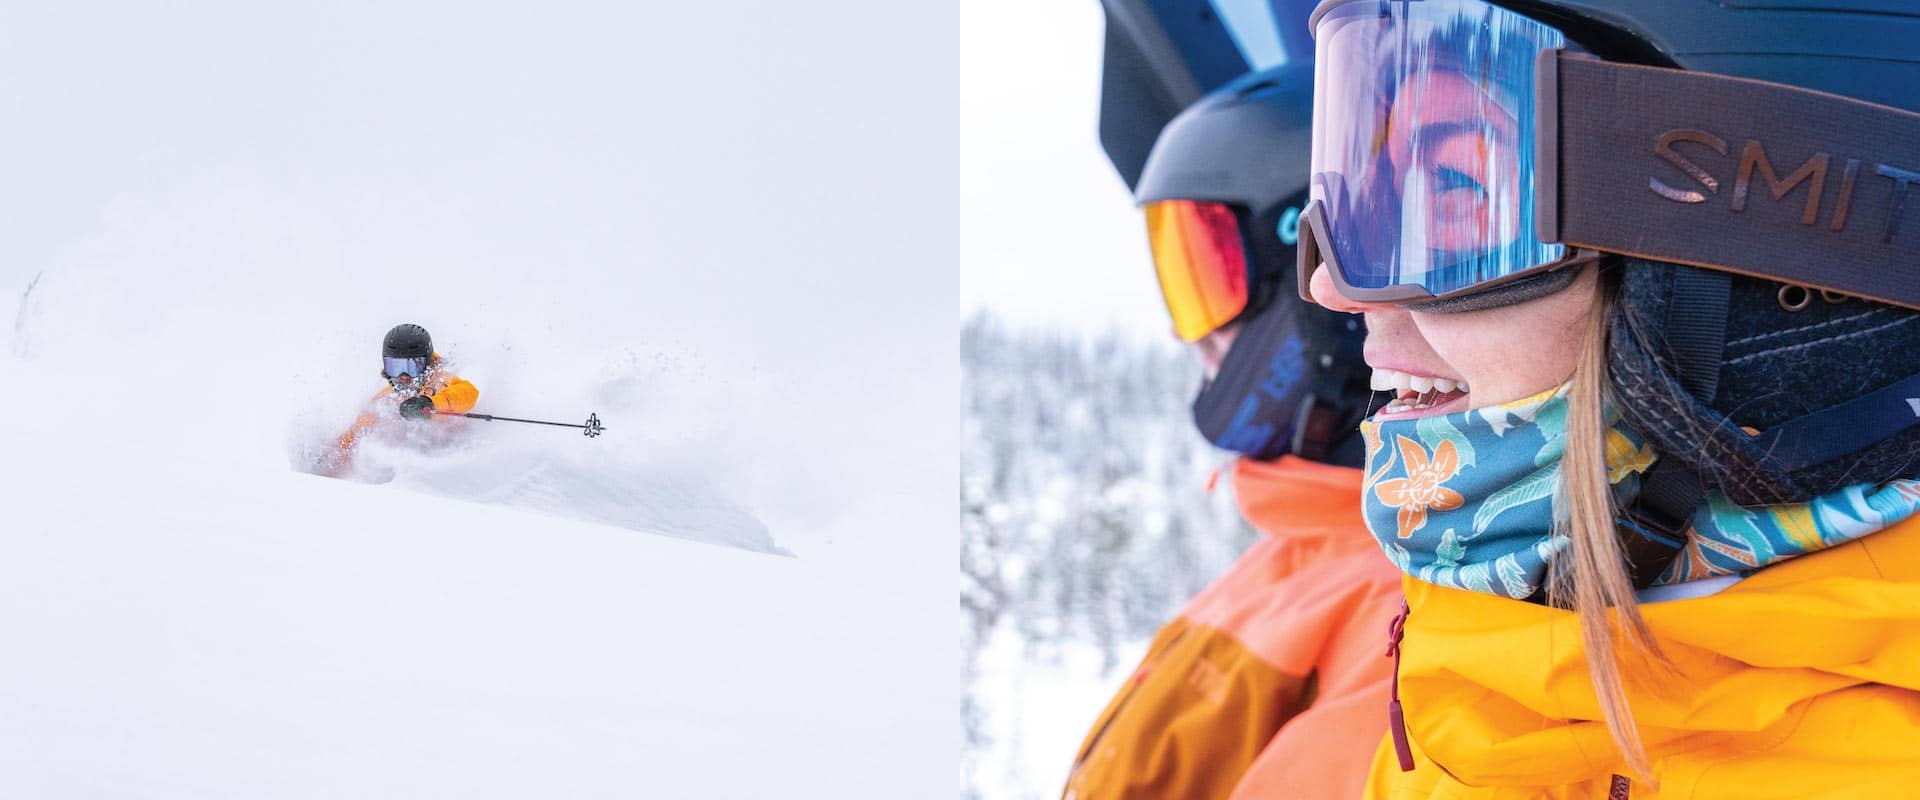 Side-by-side images of a skier and a woman smiling on a chairlift